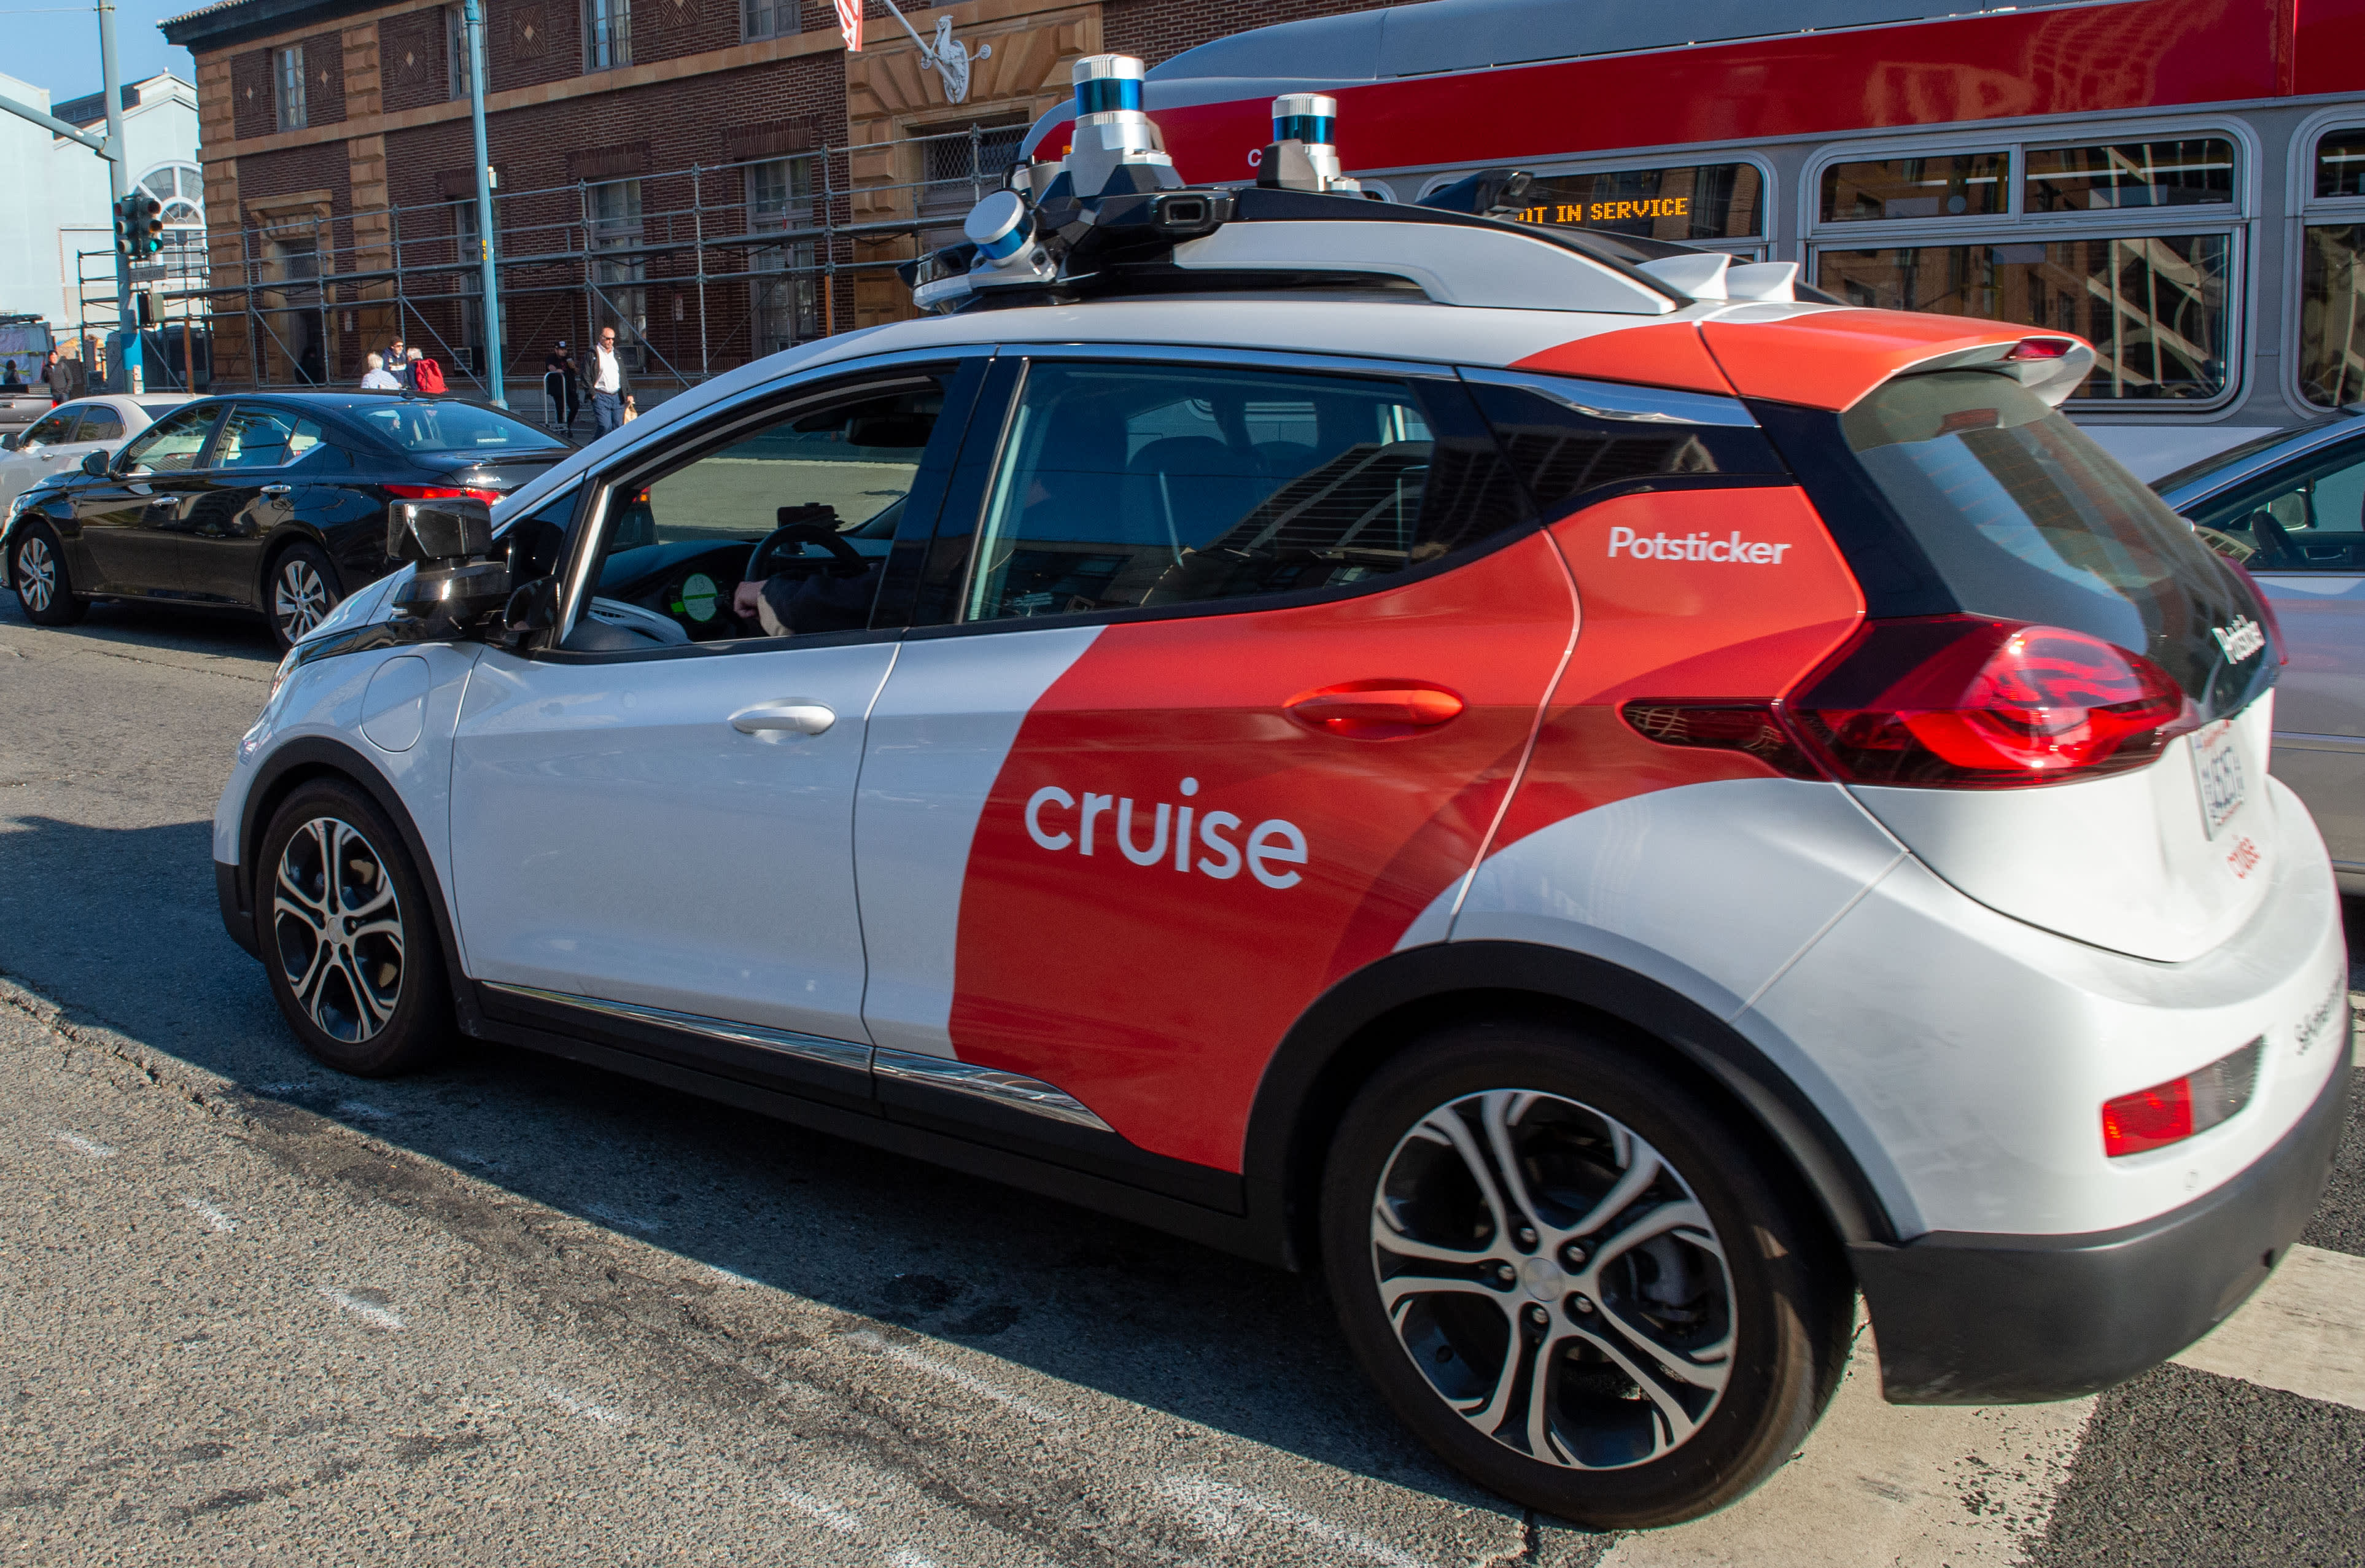 Self-driving cars from GM's Cruise block San Francisco intersection